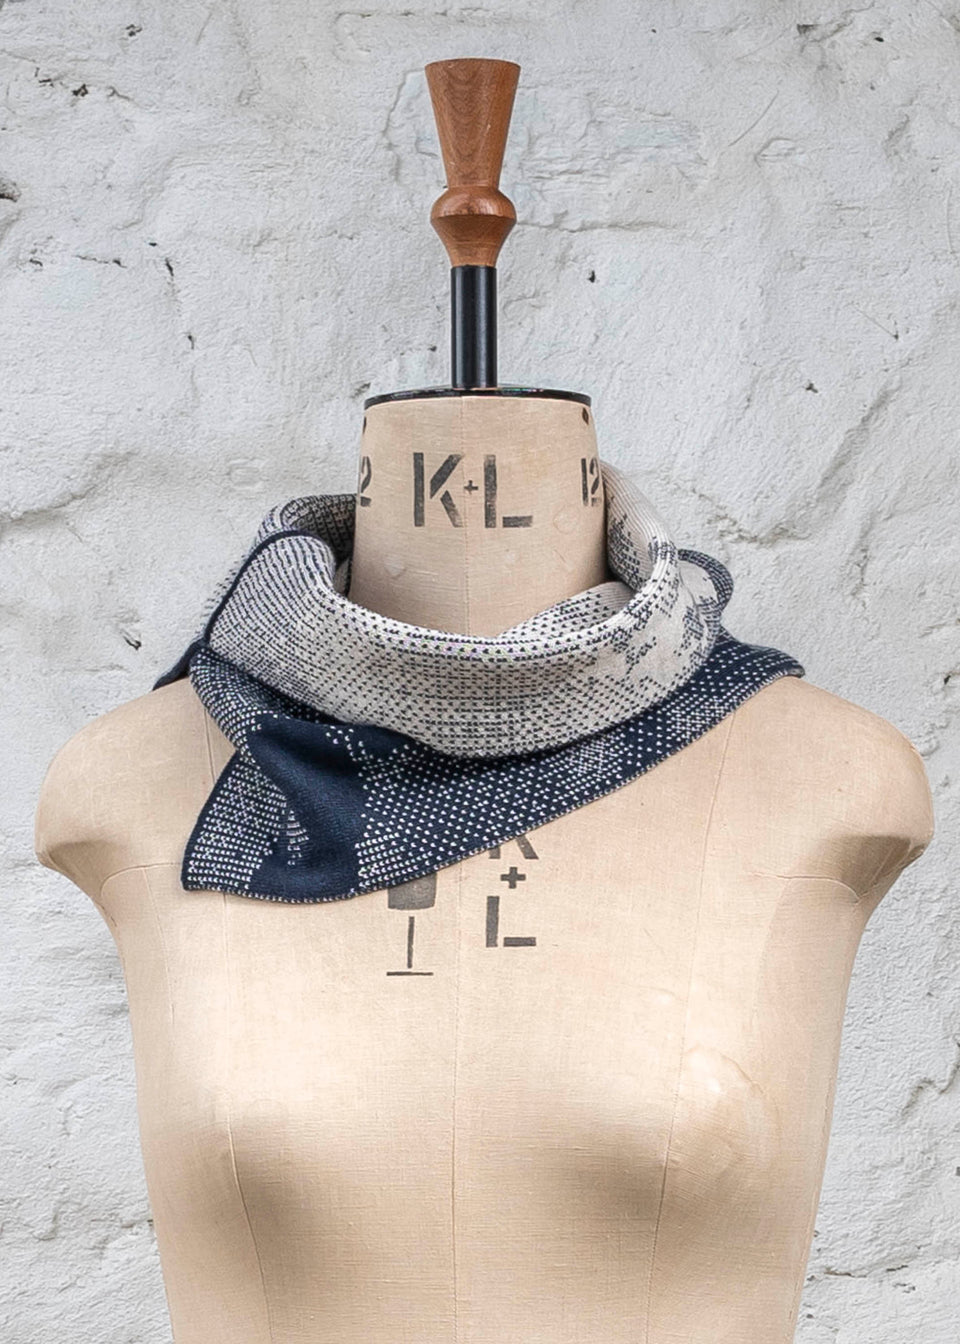 Knitted Rani asymmetric cowl. Small abstract patterns make up a larger design with photographic imagery. Shown in inky blue and antique white